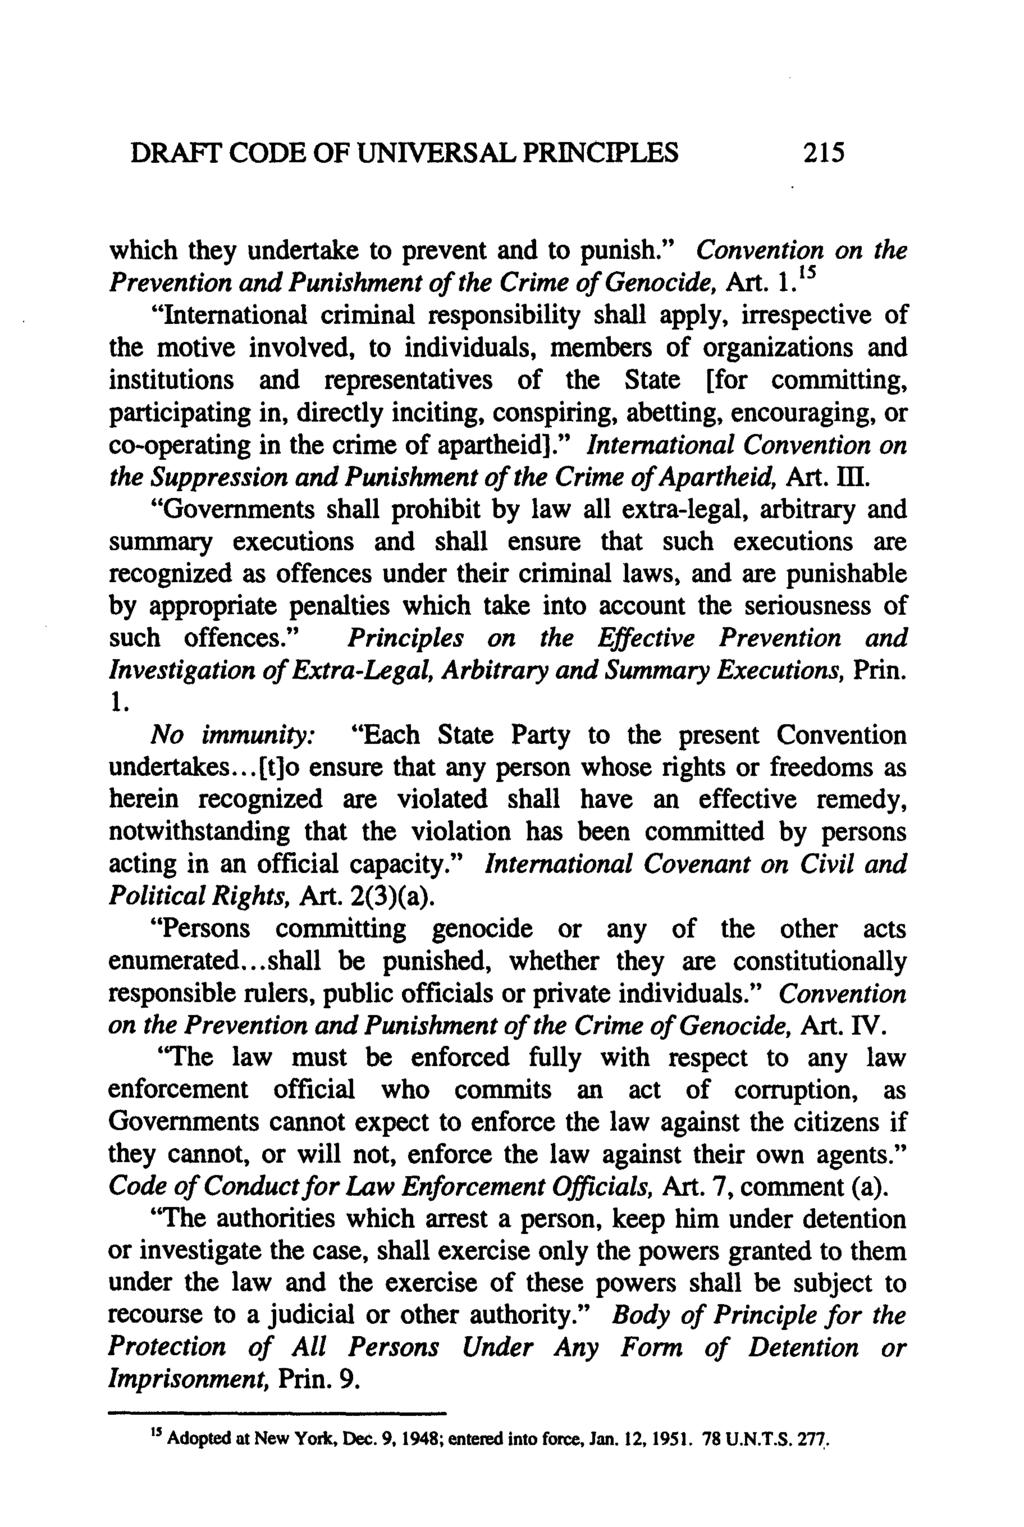 DRAFT CODE OF UNIVERSAL PRINCIPLES which they undertake to prevent and to punish." Convention on the Prevention and Punishment of the Crime of Genocide, Art. 1.